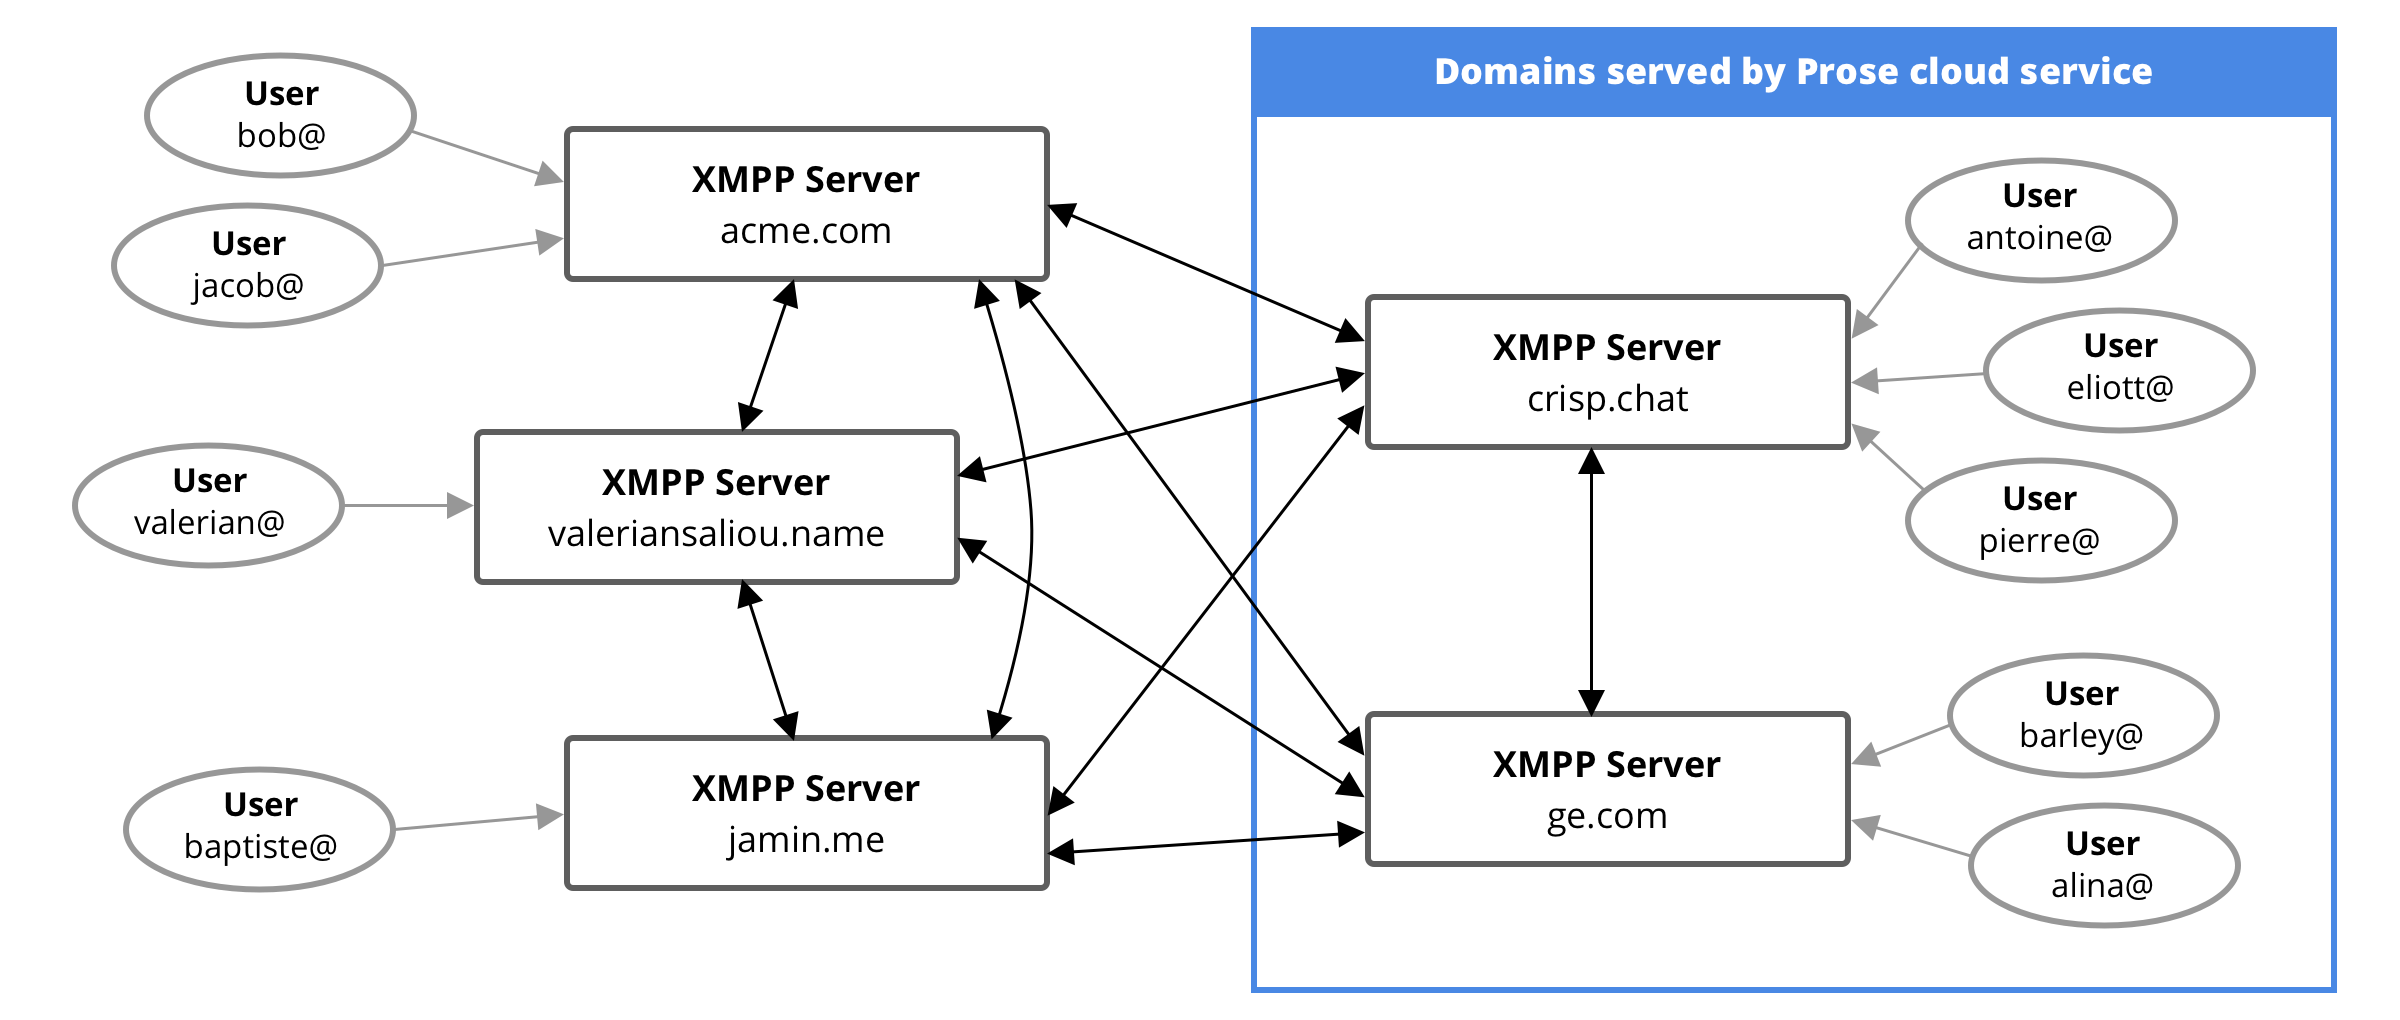 A simplified scheme of how users and servers for different teams interact on the XMPP network.